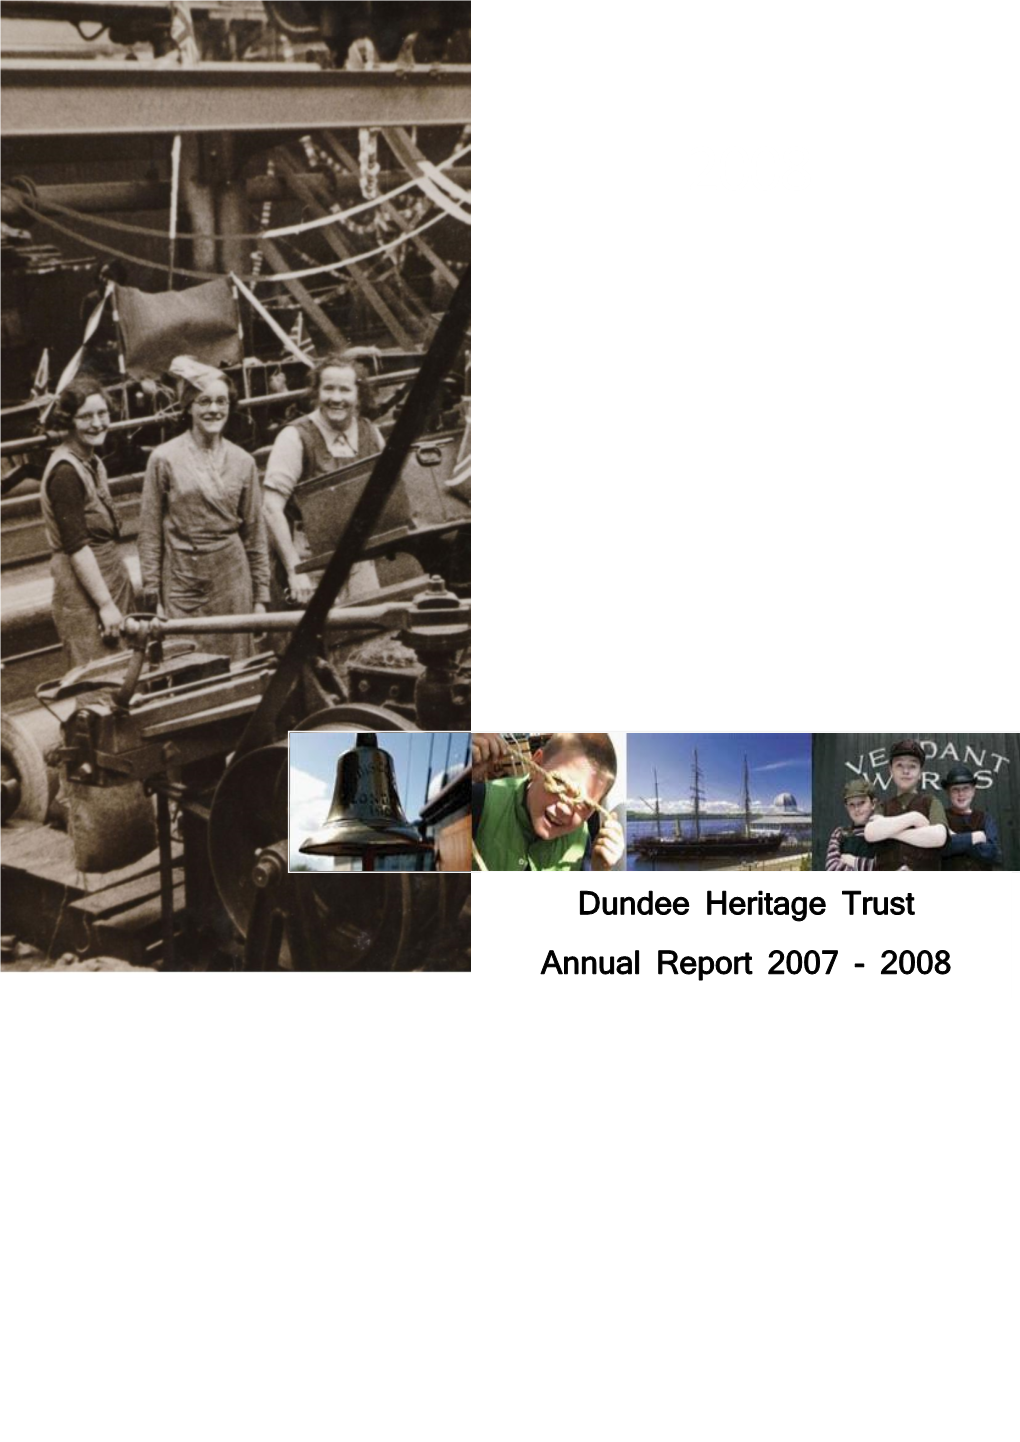 Dundee Heritage Trust Annual Report 2007 - 2008